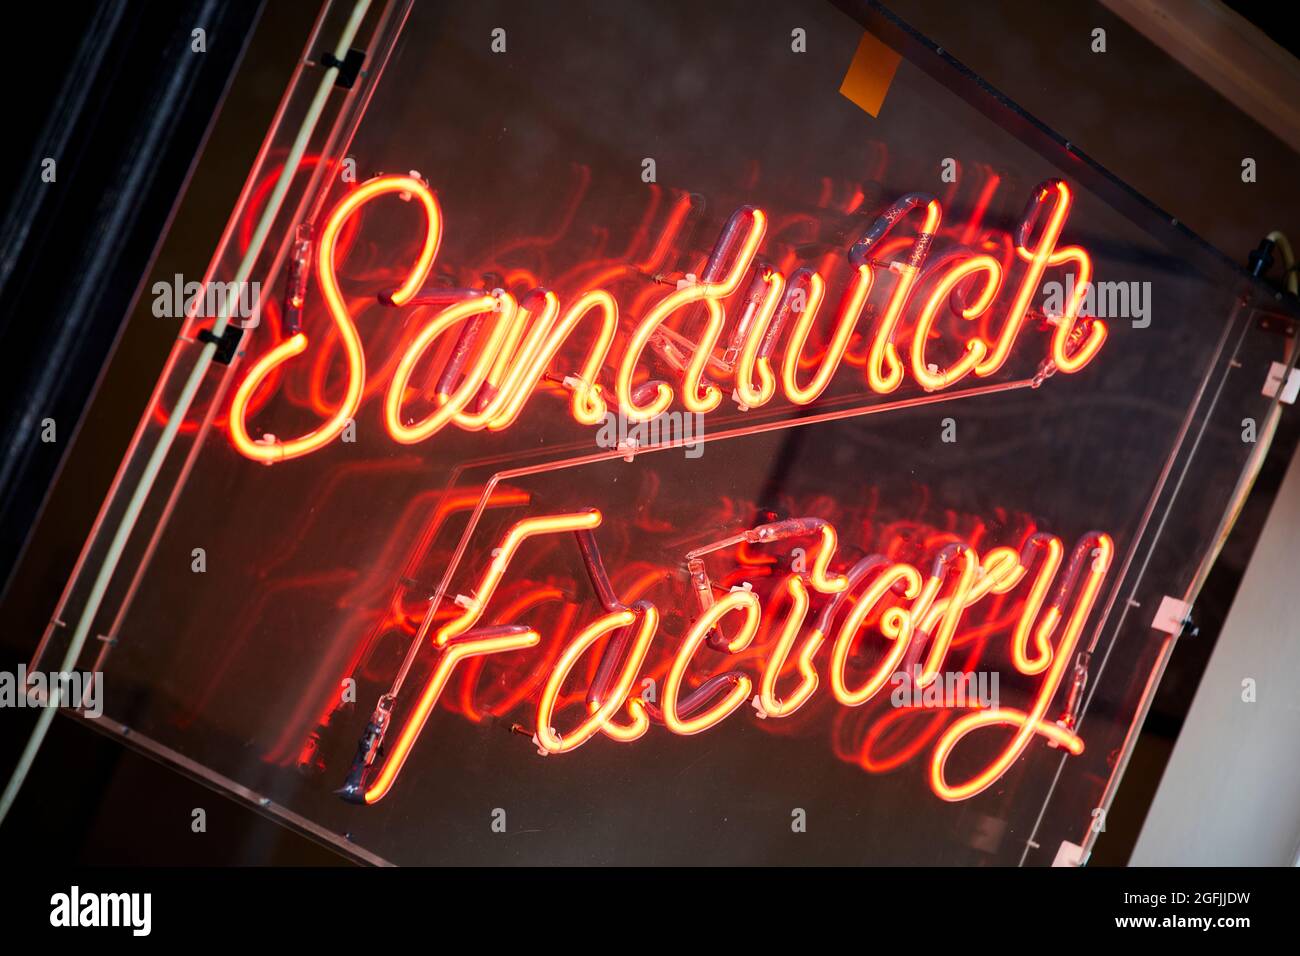 Stockport neon sign Sandwich Factory Stock Photo